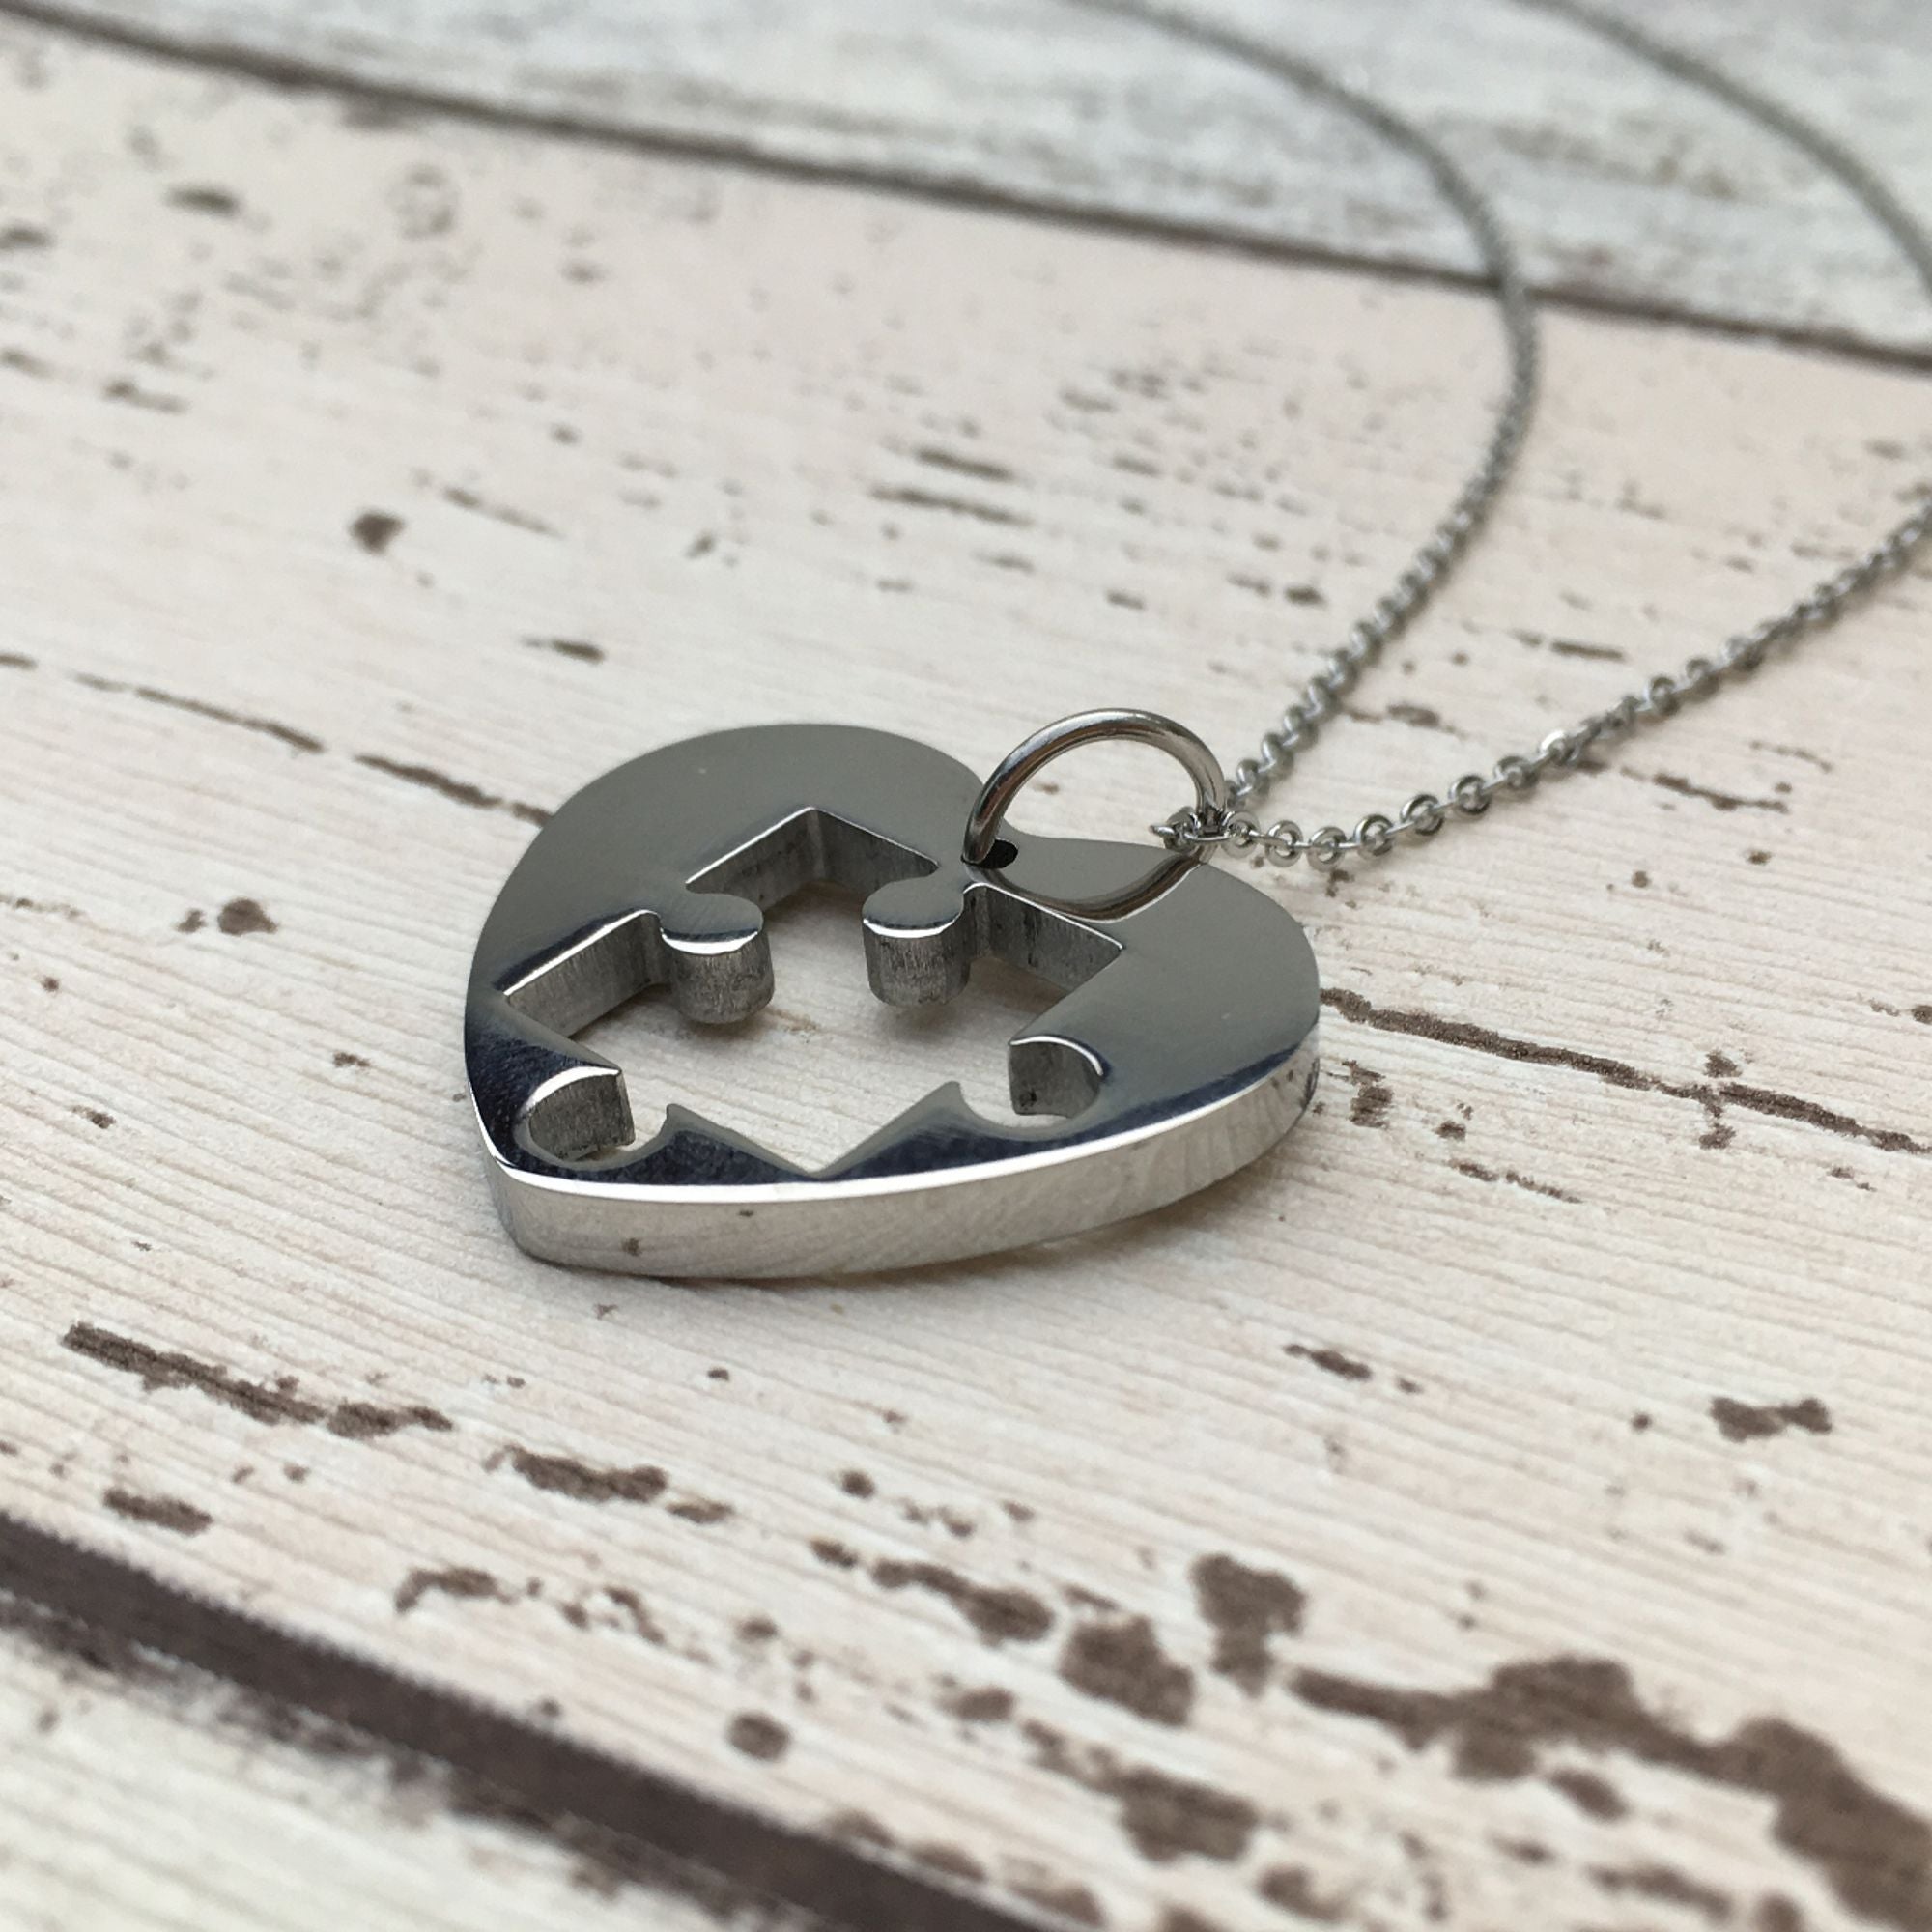 autism necklace for ladies gift present